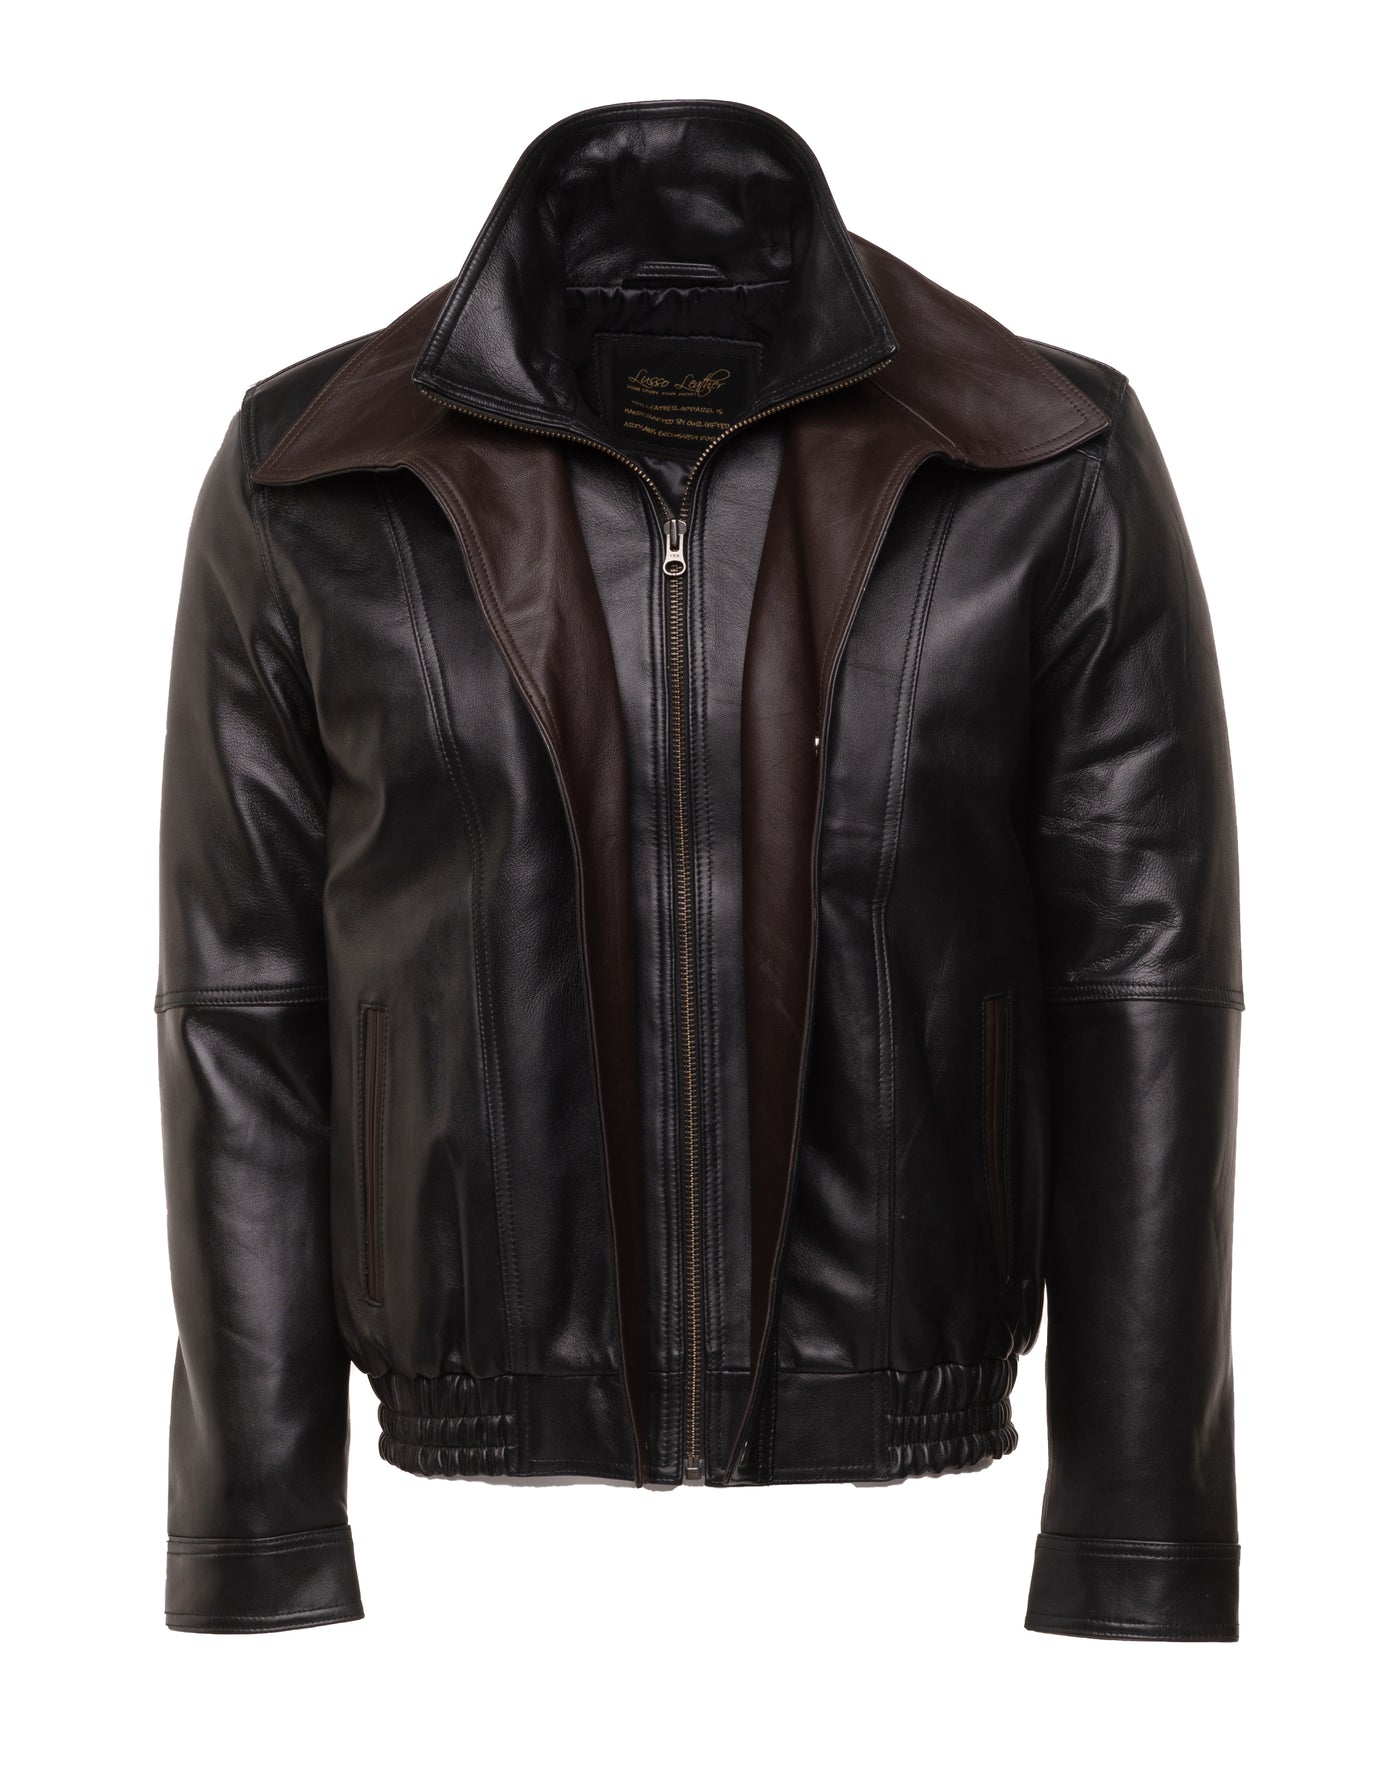 Byrne's brown and black Aviator leather jacket